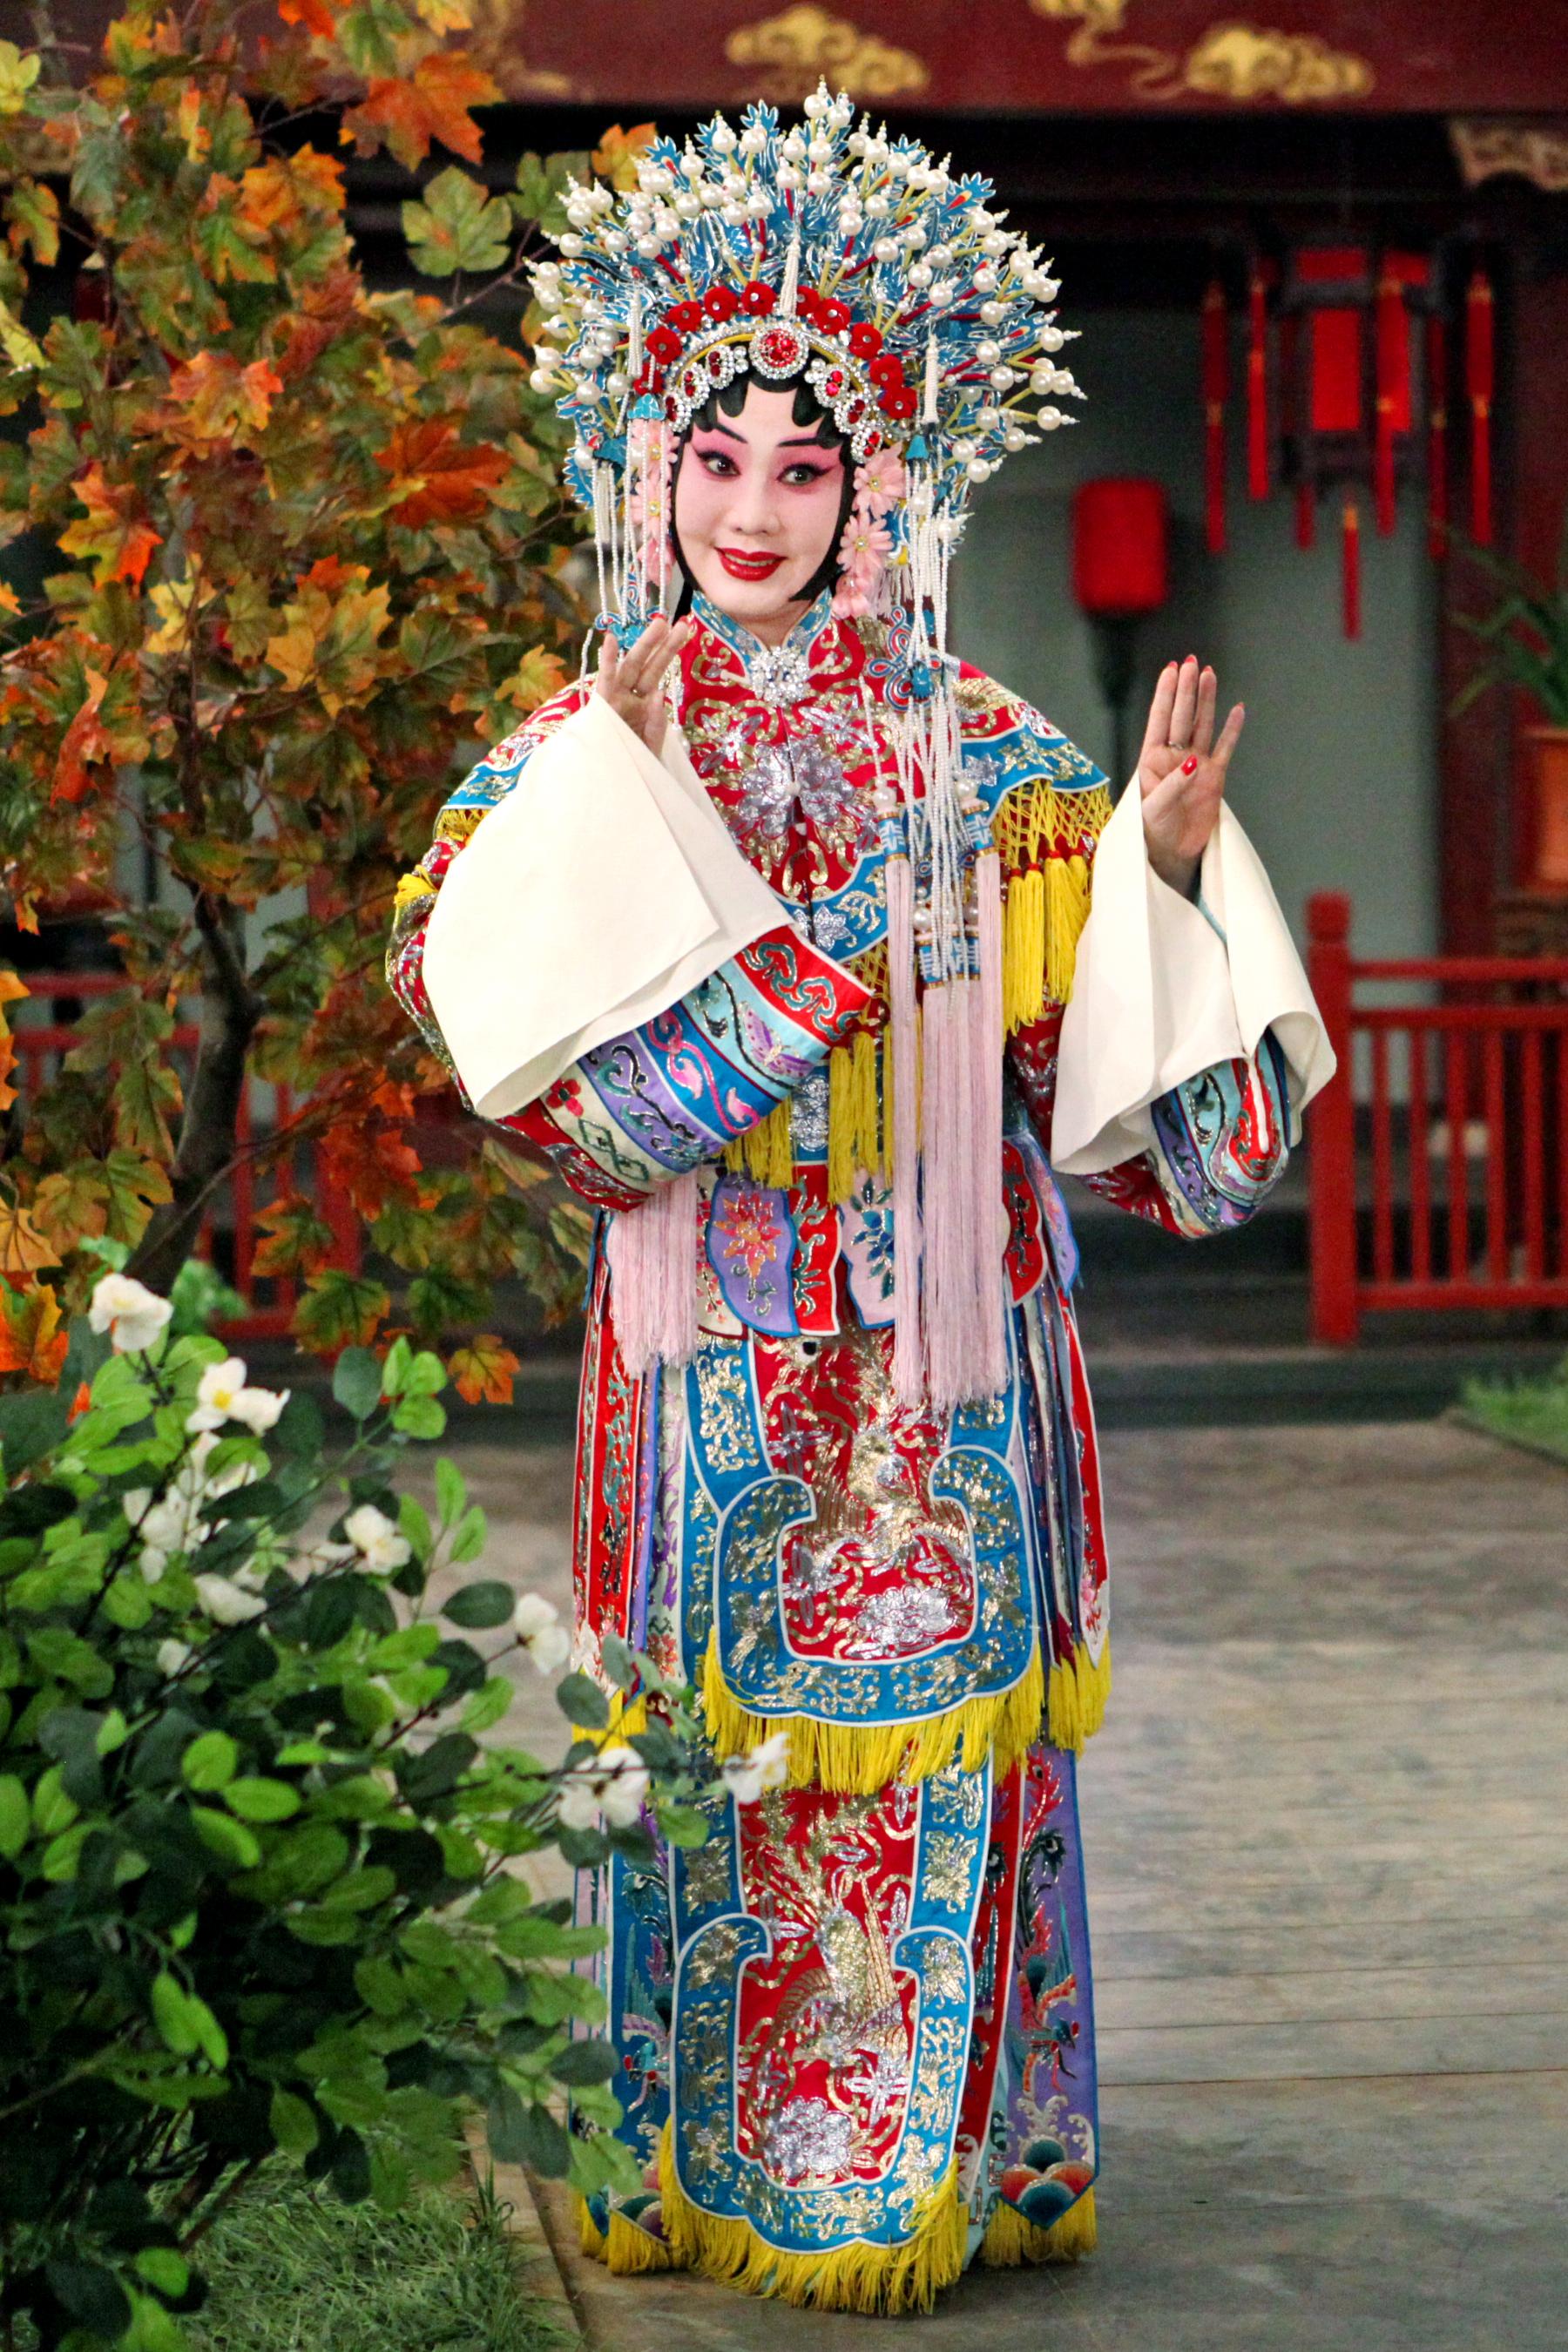 The Leisure and Cultural Services Department has invited the Peking Opera Theatre of Beijing to come to Hong Kong in mid-June to stage three performances of iconic plays, which highlight the artistic legacy of Peking opera master Zhang Junqiu, famed for his qingyi roles, as the opening programme of this year's Chinese Opera Festival. Photo shows a scene of "Top Scholar as Matchmaker".